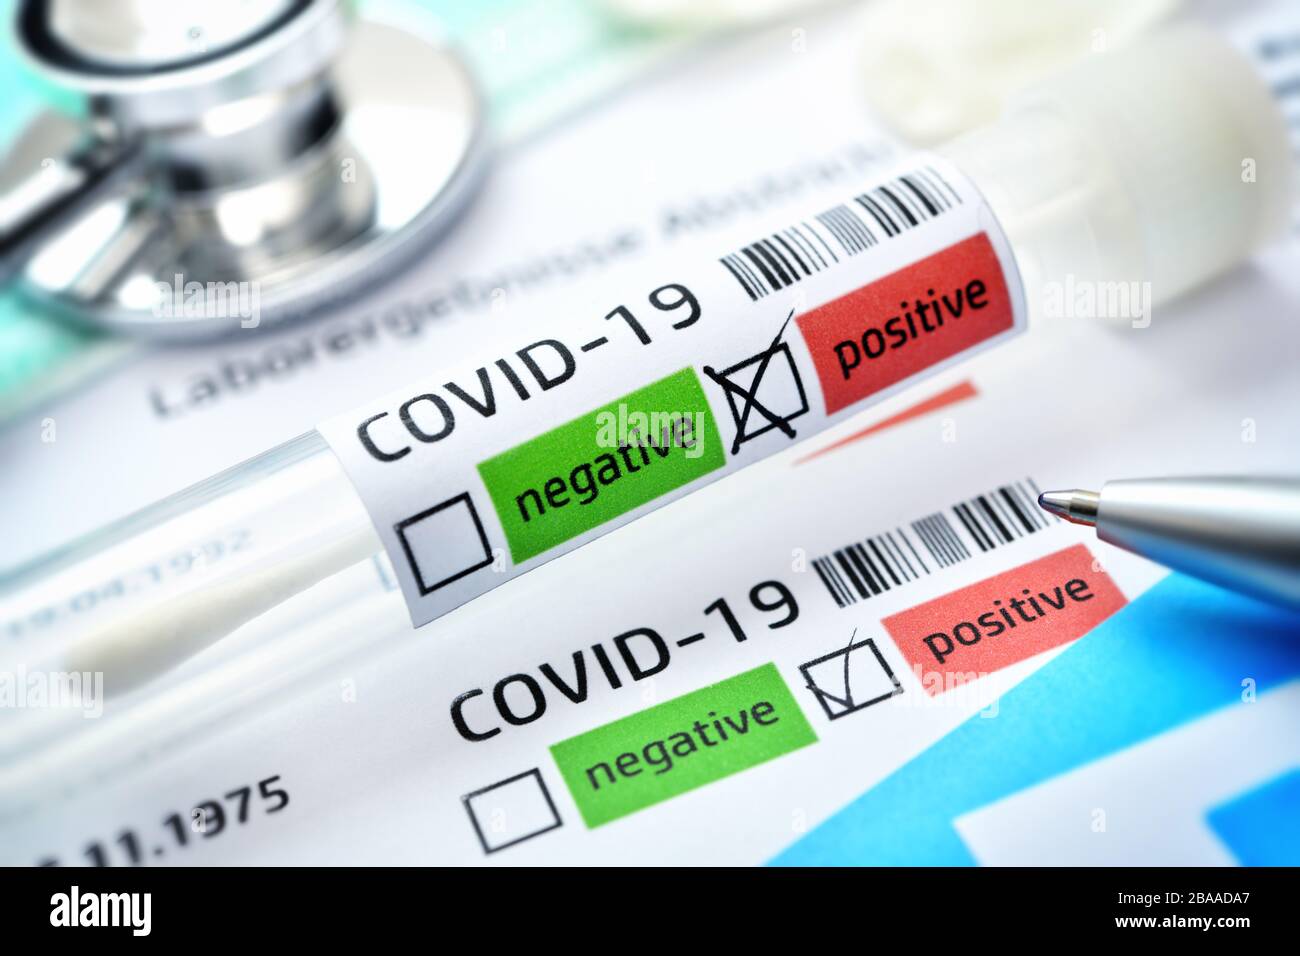 Deduction tubes with positive Covid 19 findings, symbolic photo Coronavirus, Abstrich-Röhrchen mit positivem Covid-19-Befund, Symbolfoto Coronavirus Stock Photo